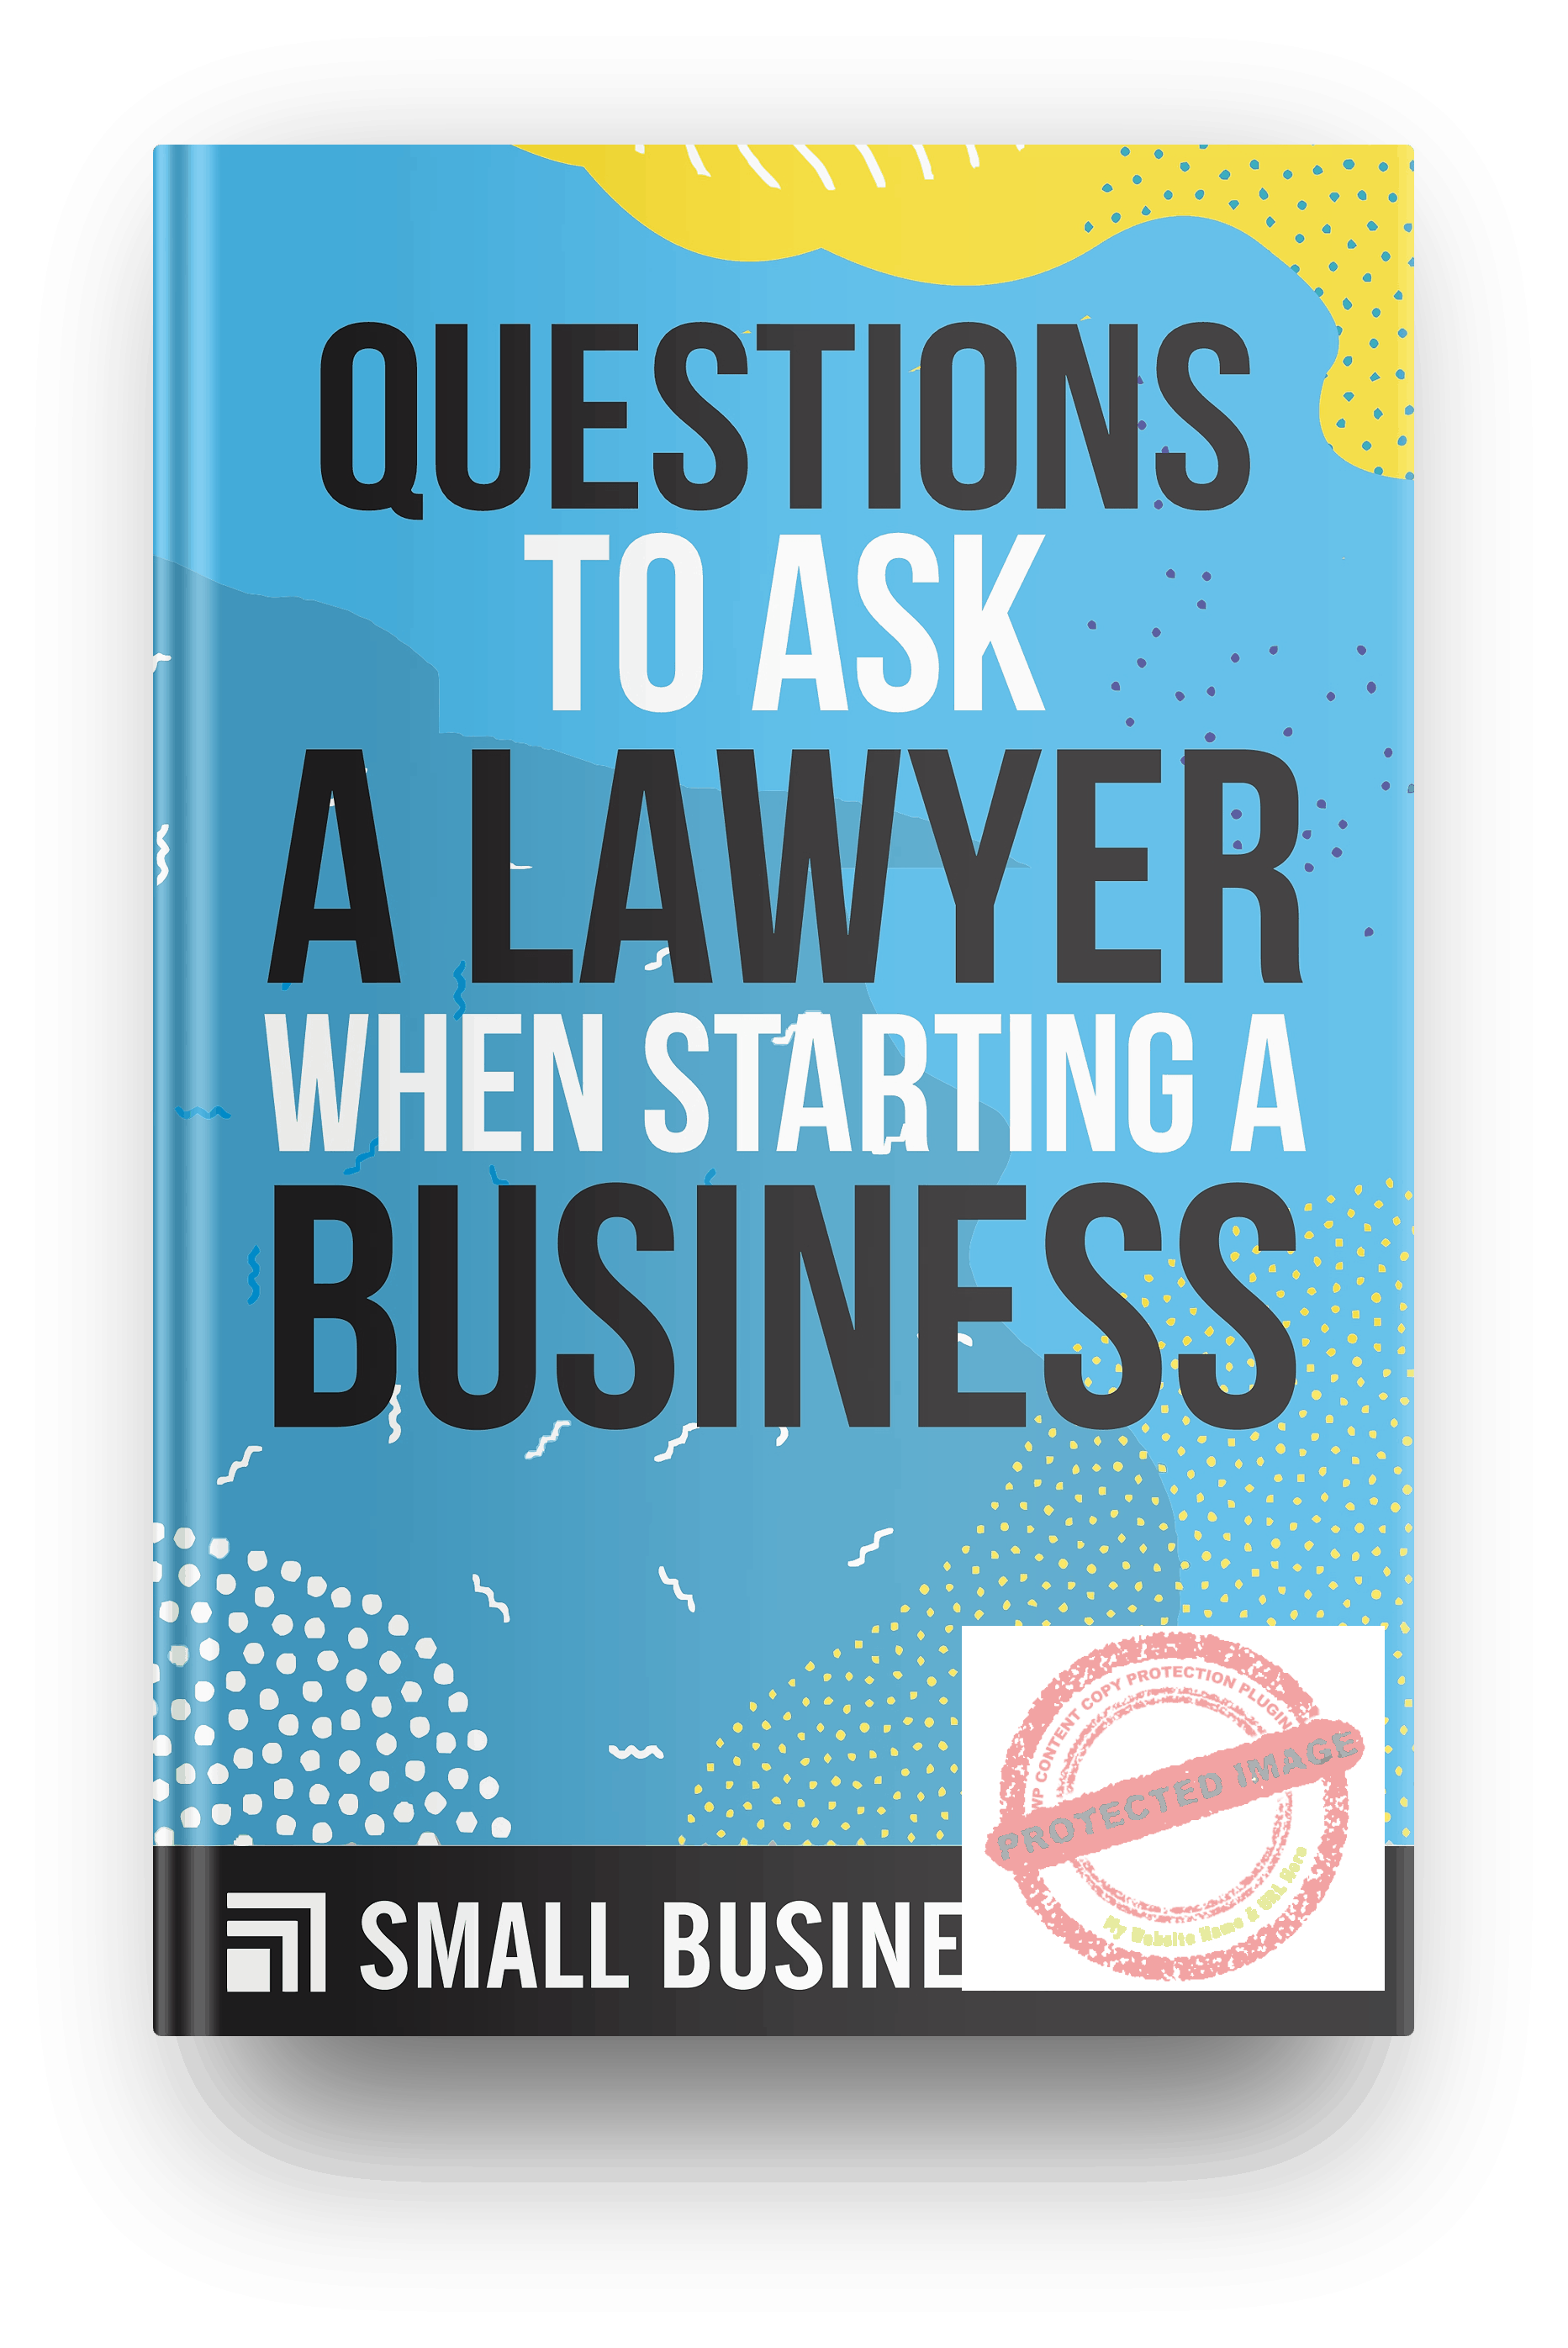 Questions to ask a lawyer when starting a business